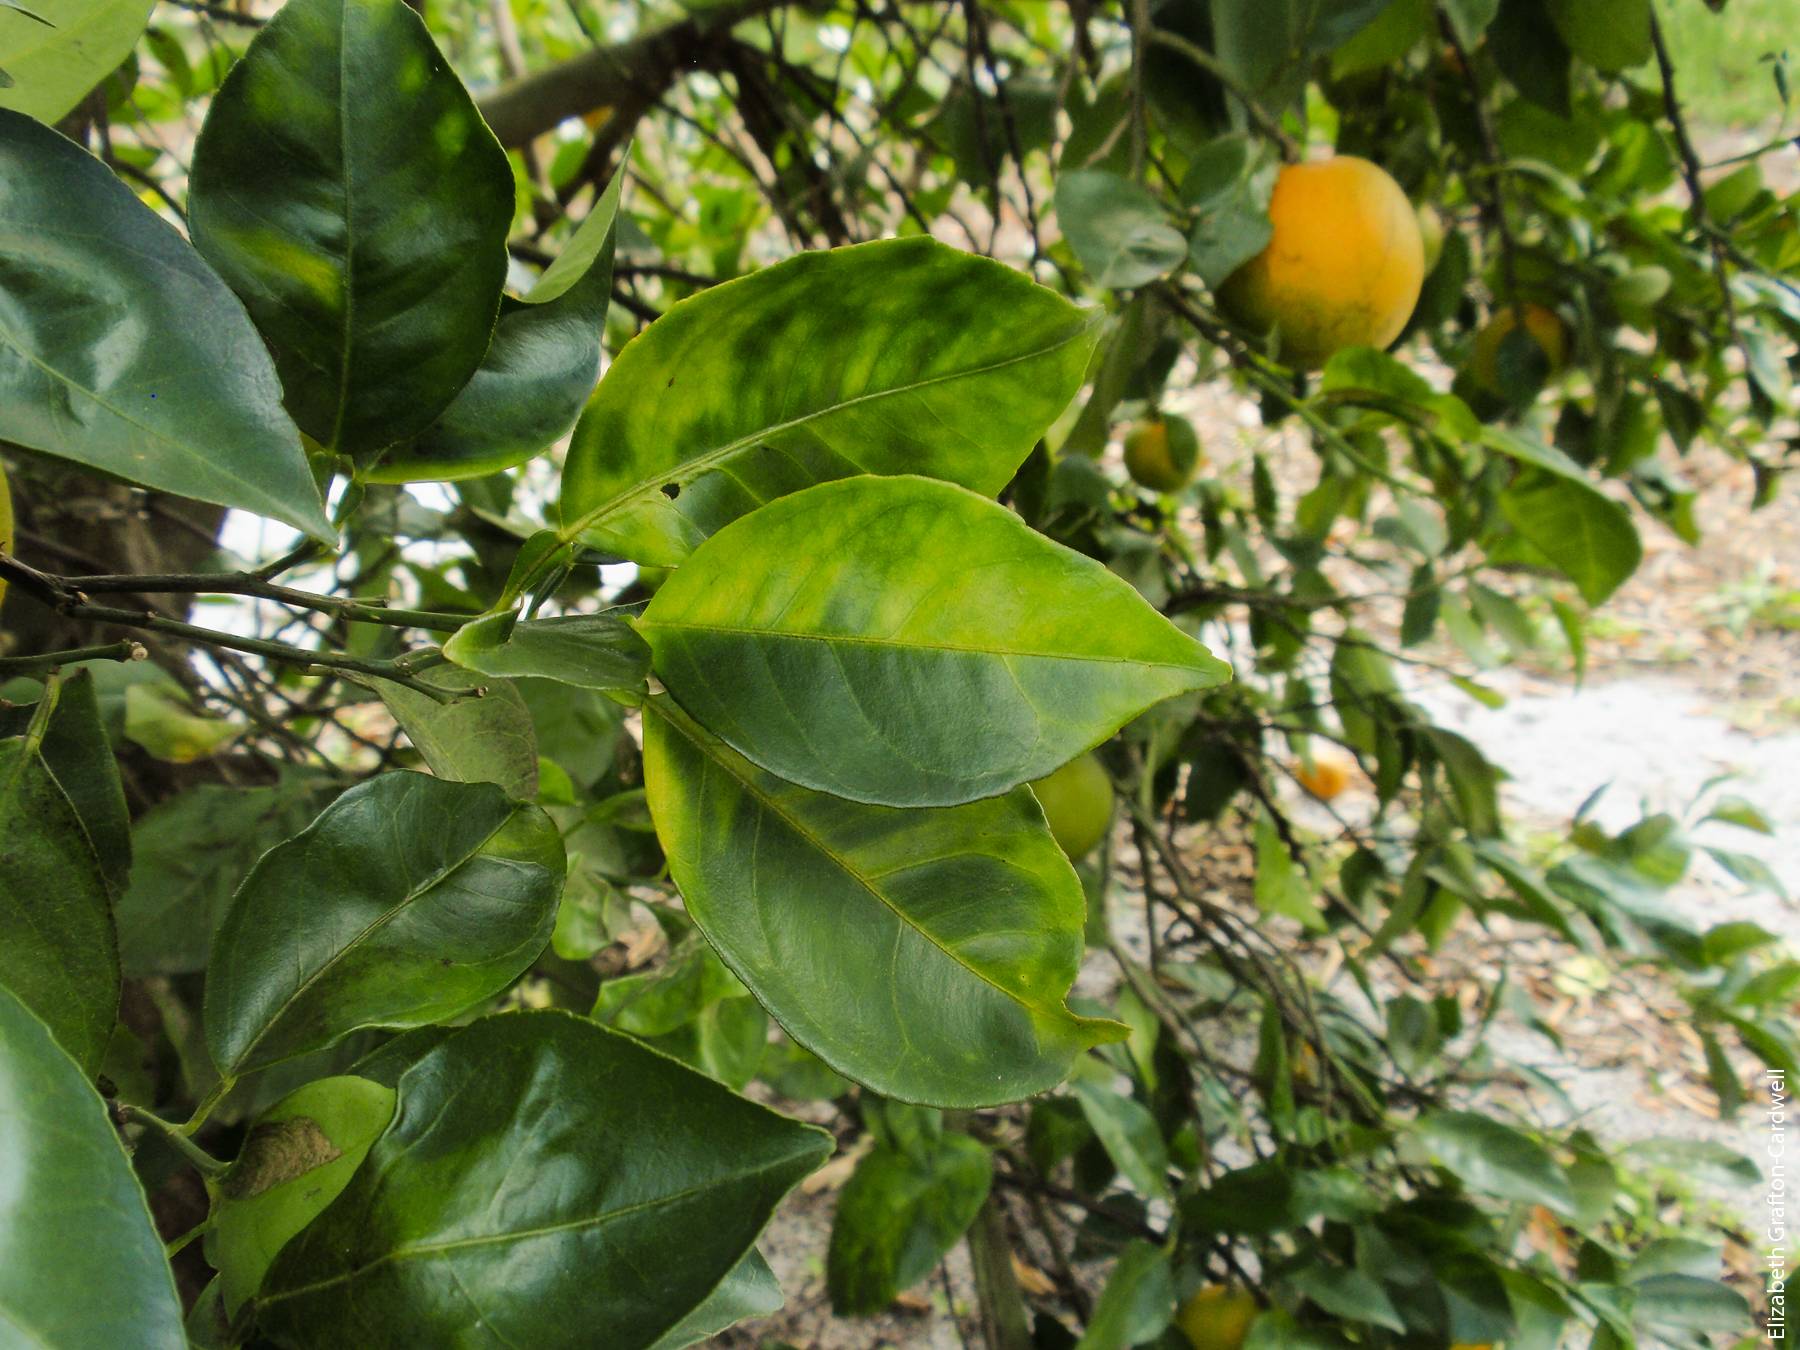 Symptoms of huanglongbing disease, also known as citrus greening, include mottling of leaves and greening of fruit.